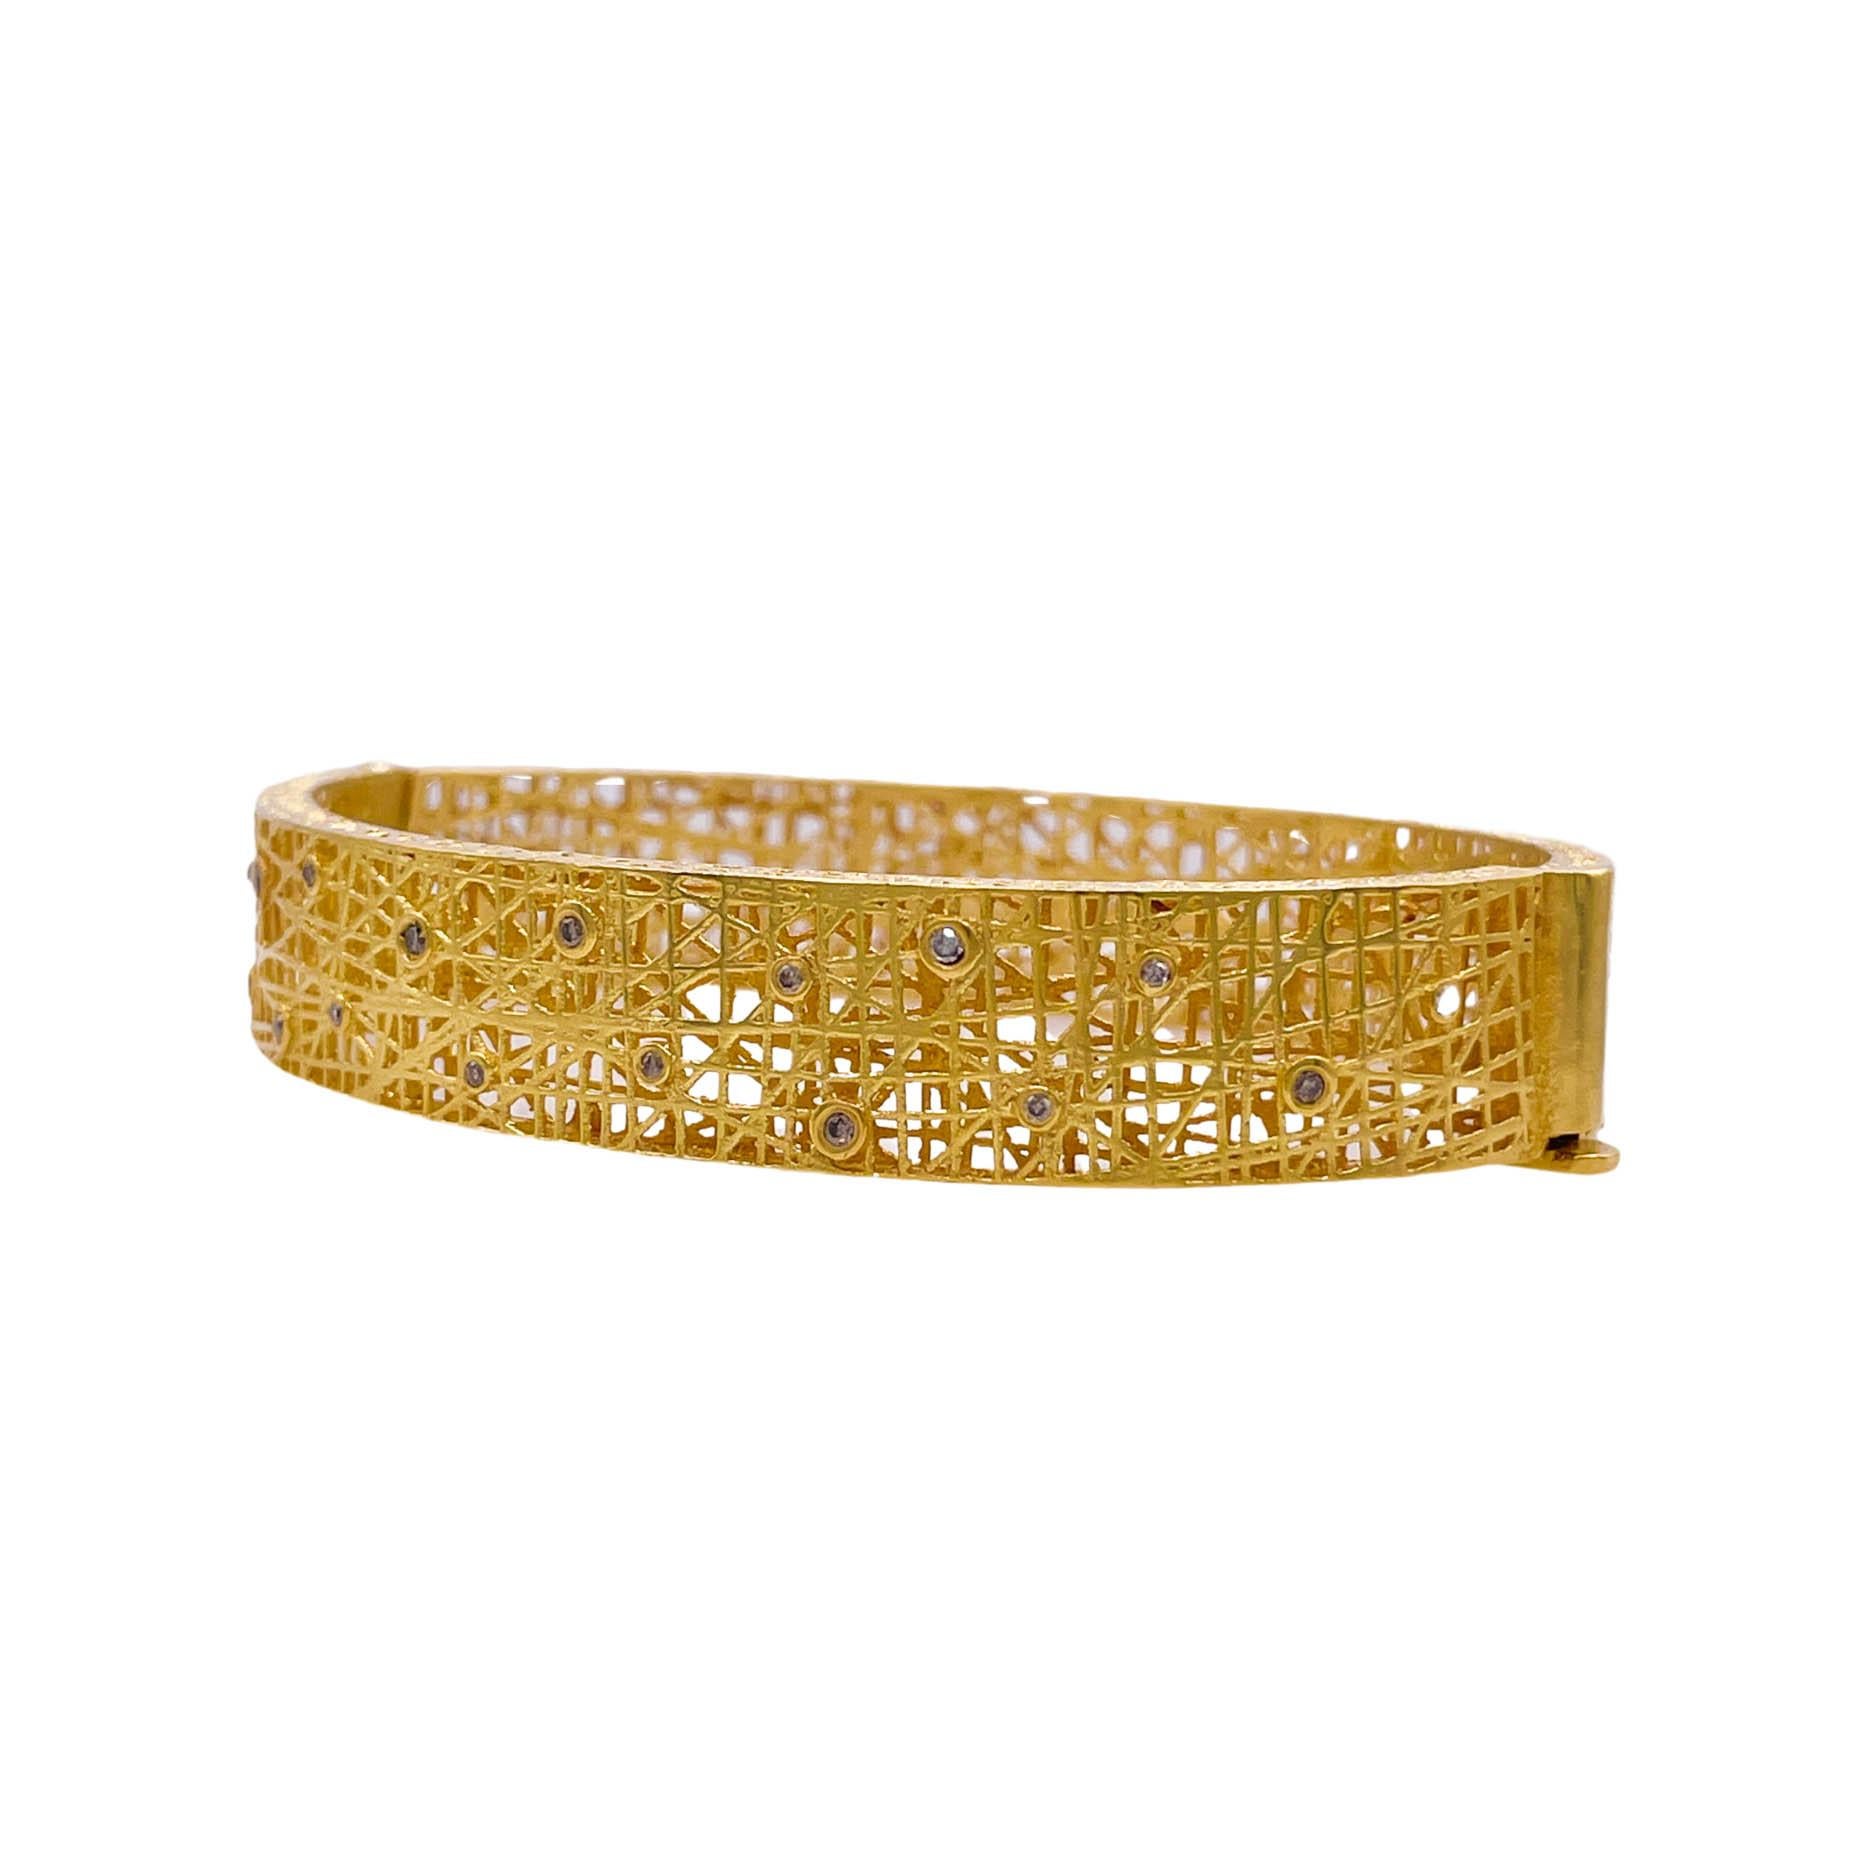 Jay Feder 18k Yellow Gold Diamond Lace Bangle Bracelet In Good Condition For Sale In Boca Raton, FL